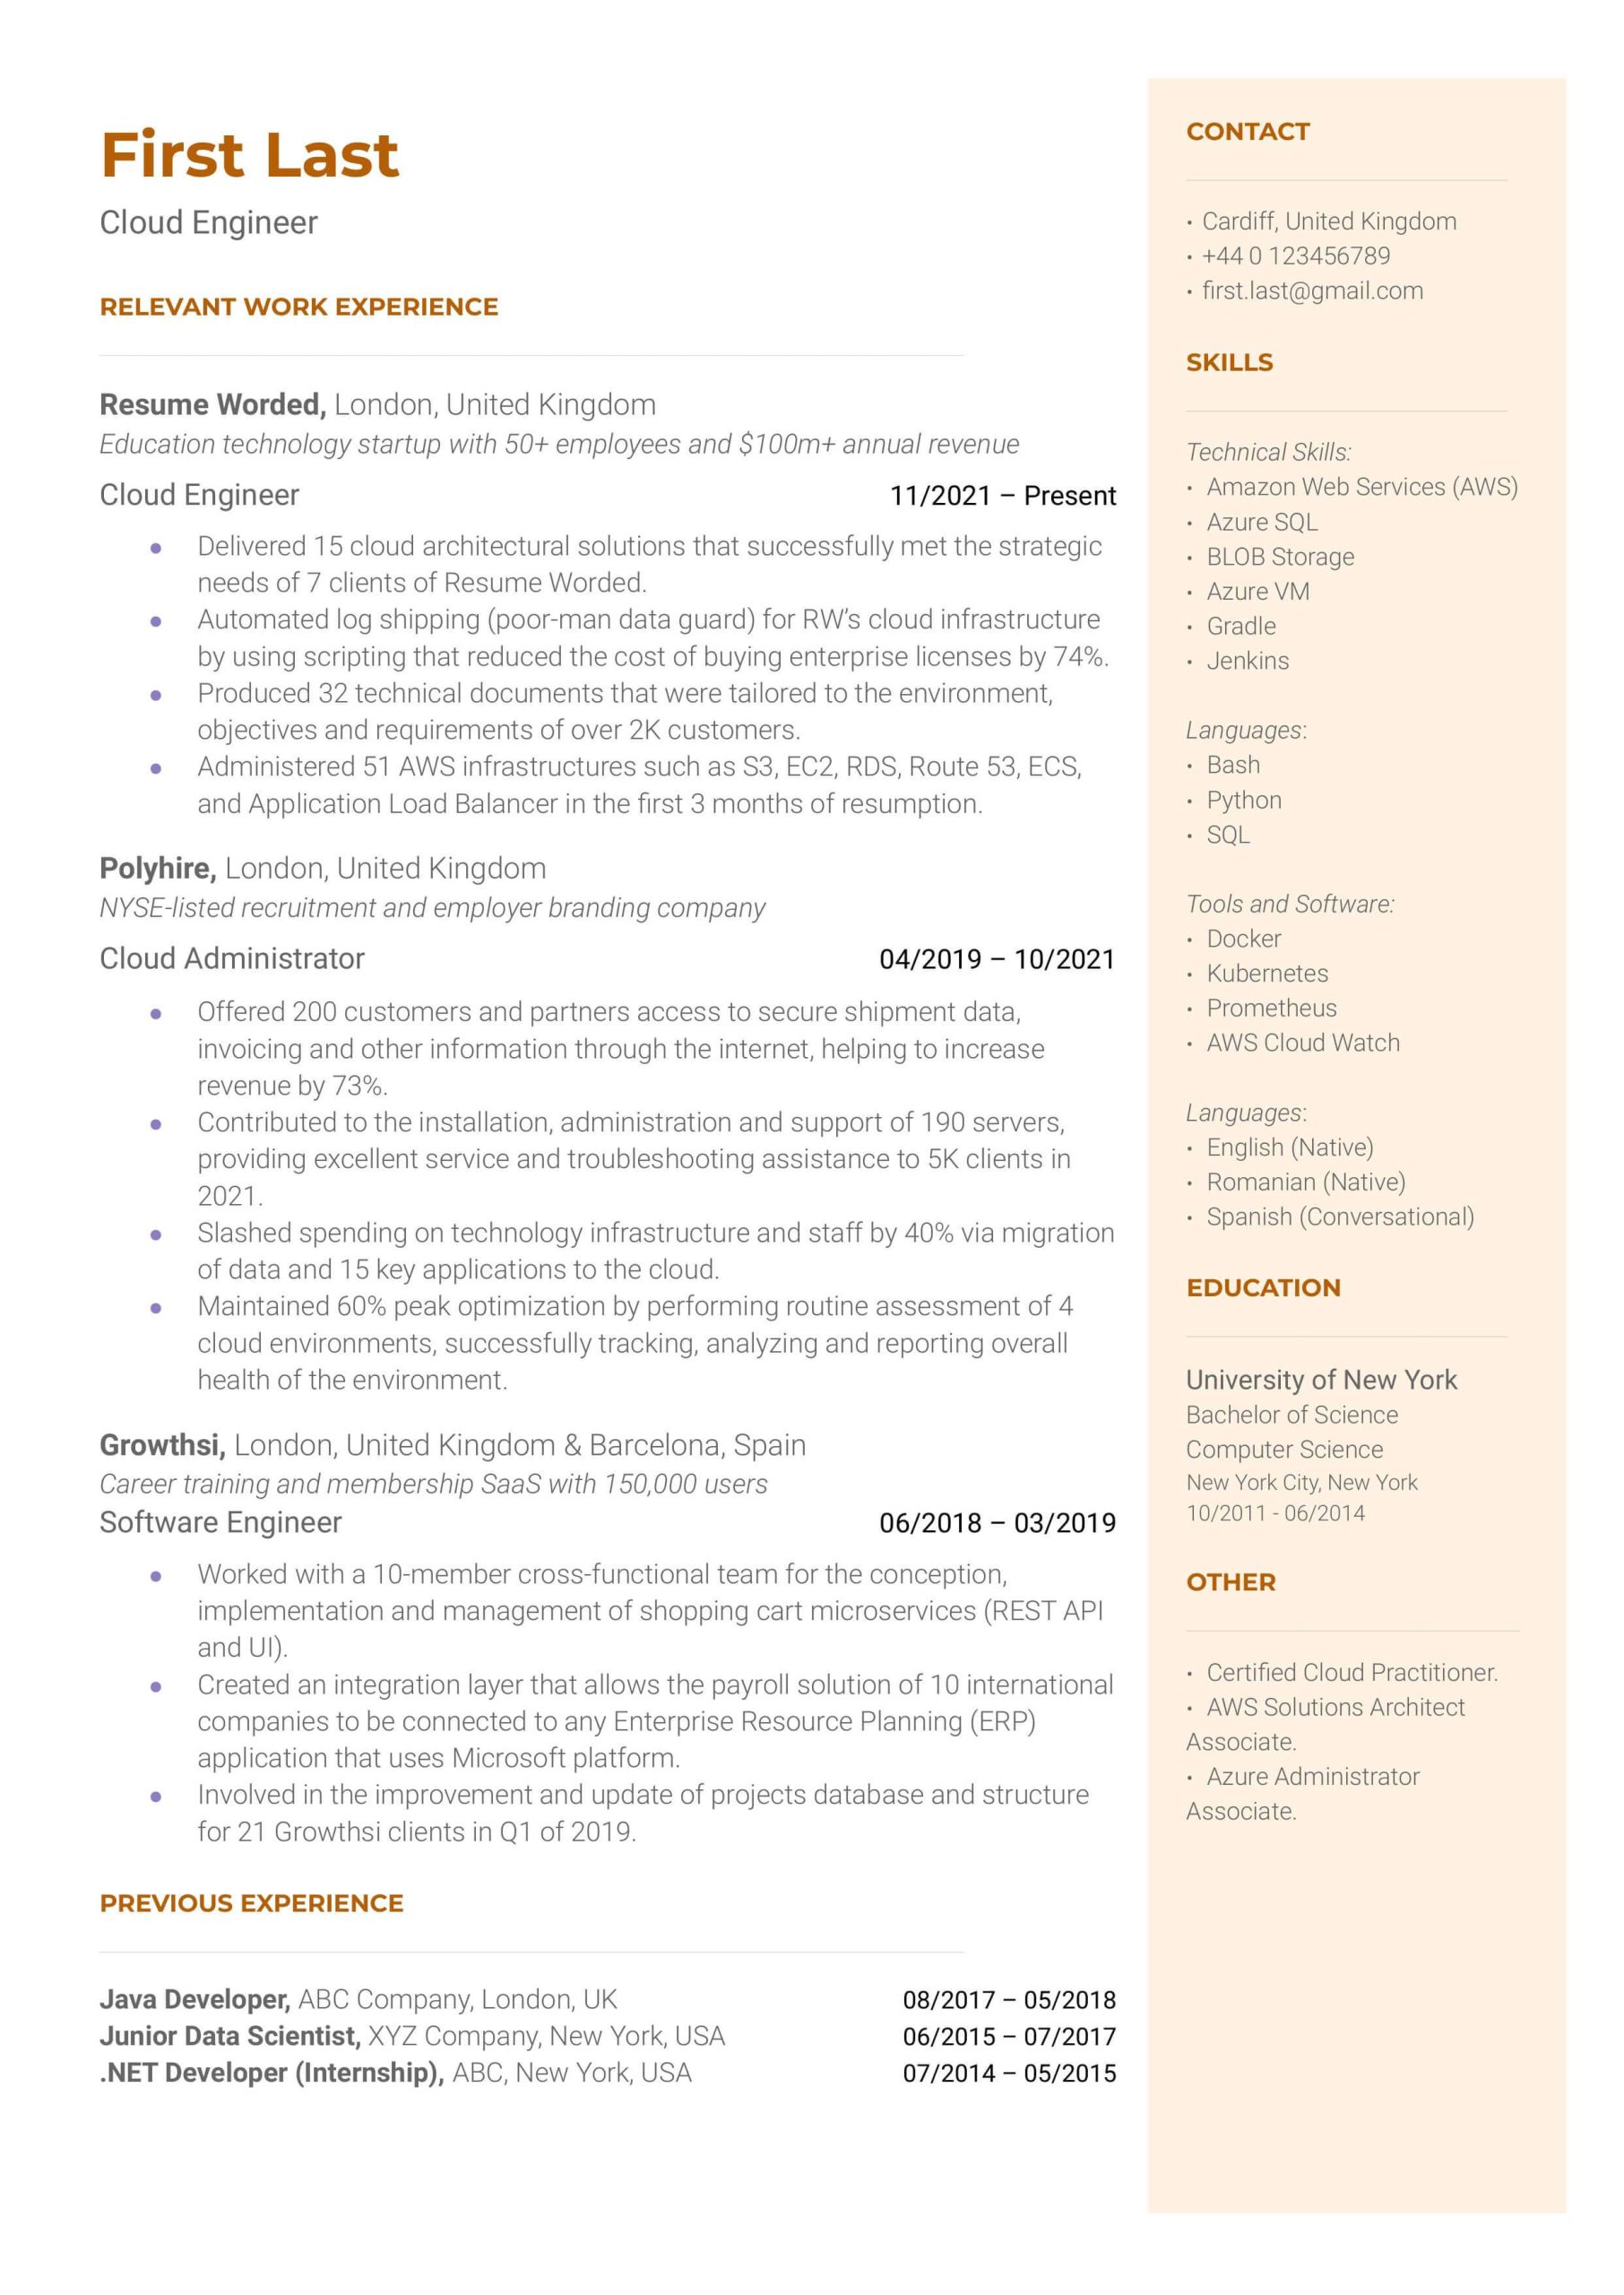 Sample Resume with Comp Tia Scredentials 4 Desktop Support Resume Examples for 2022 Resume Worded